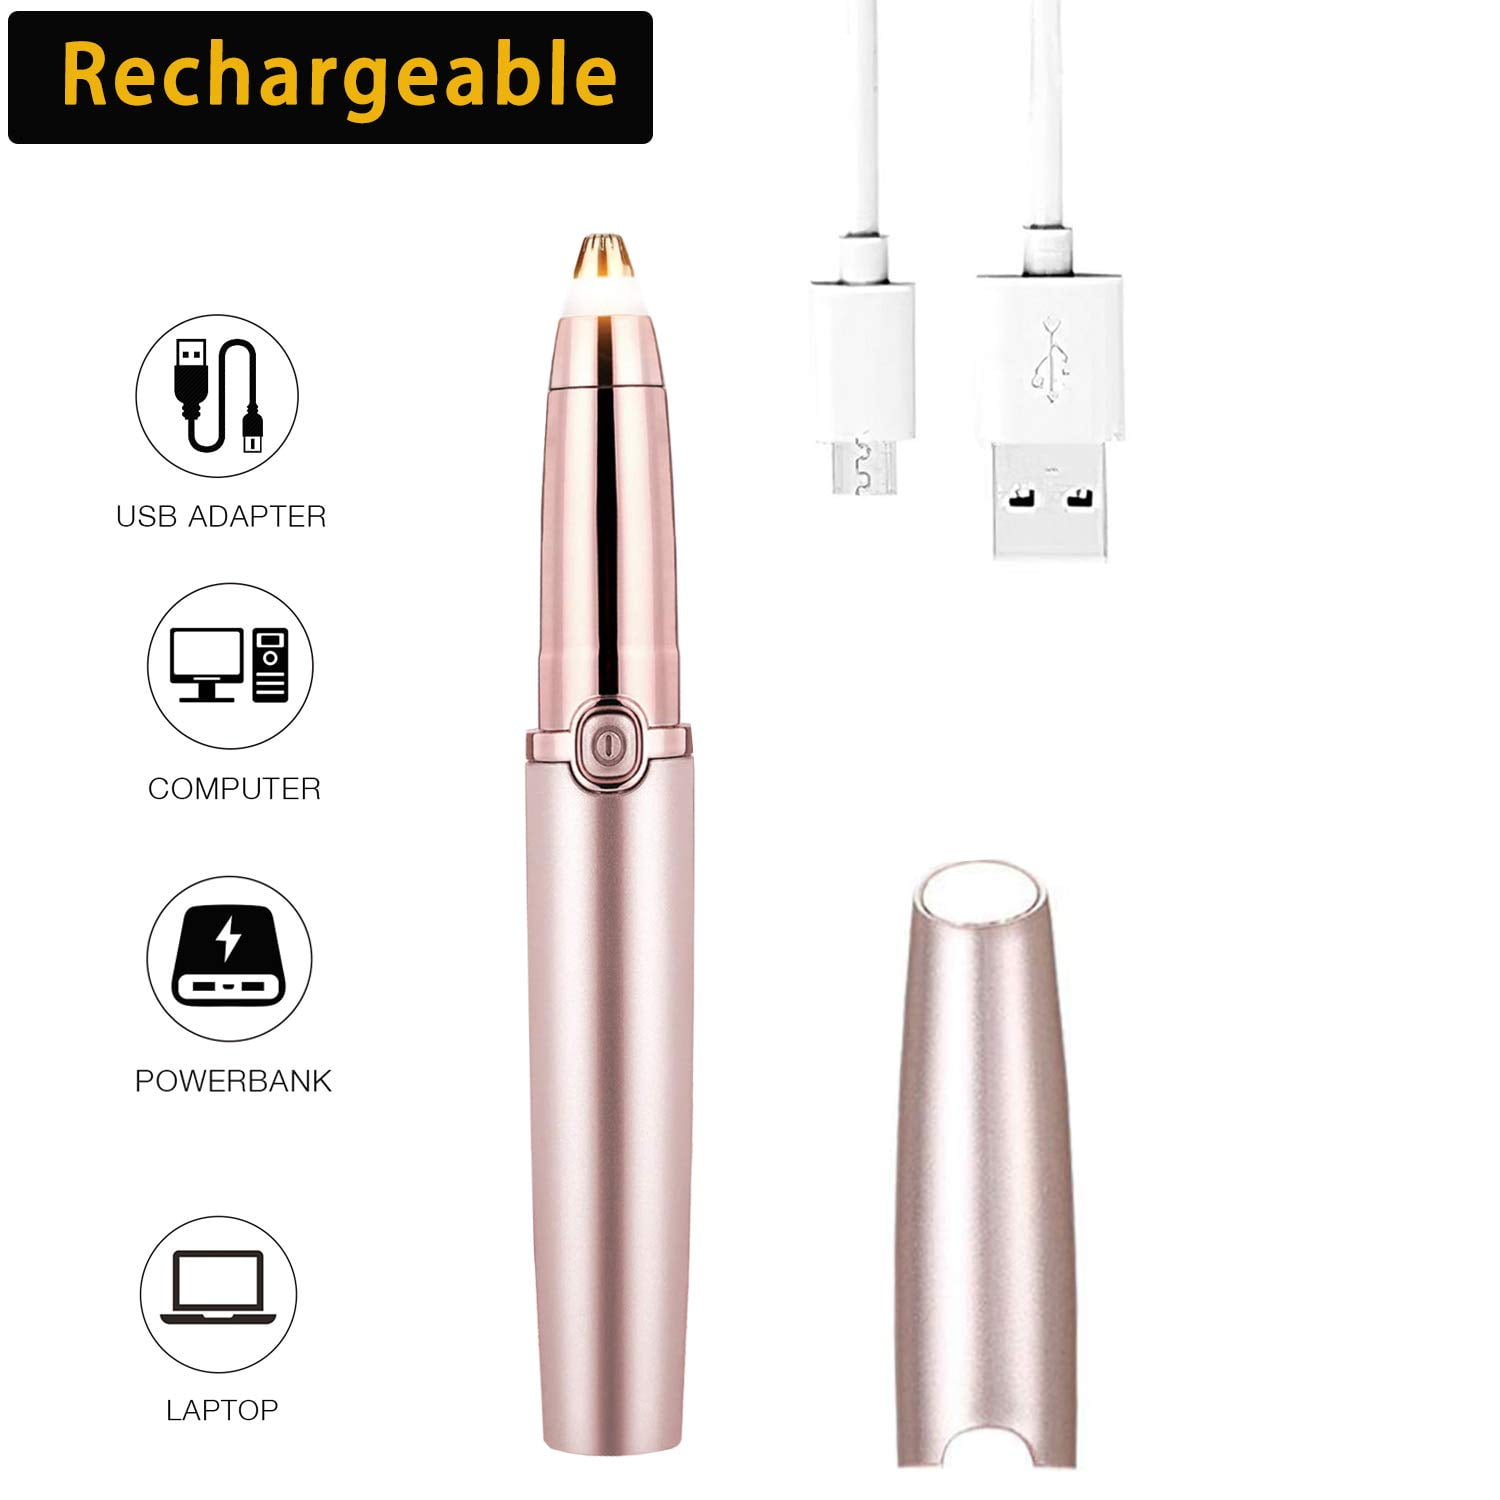 rechargeable eyebrow hair remover